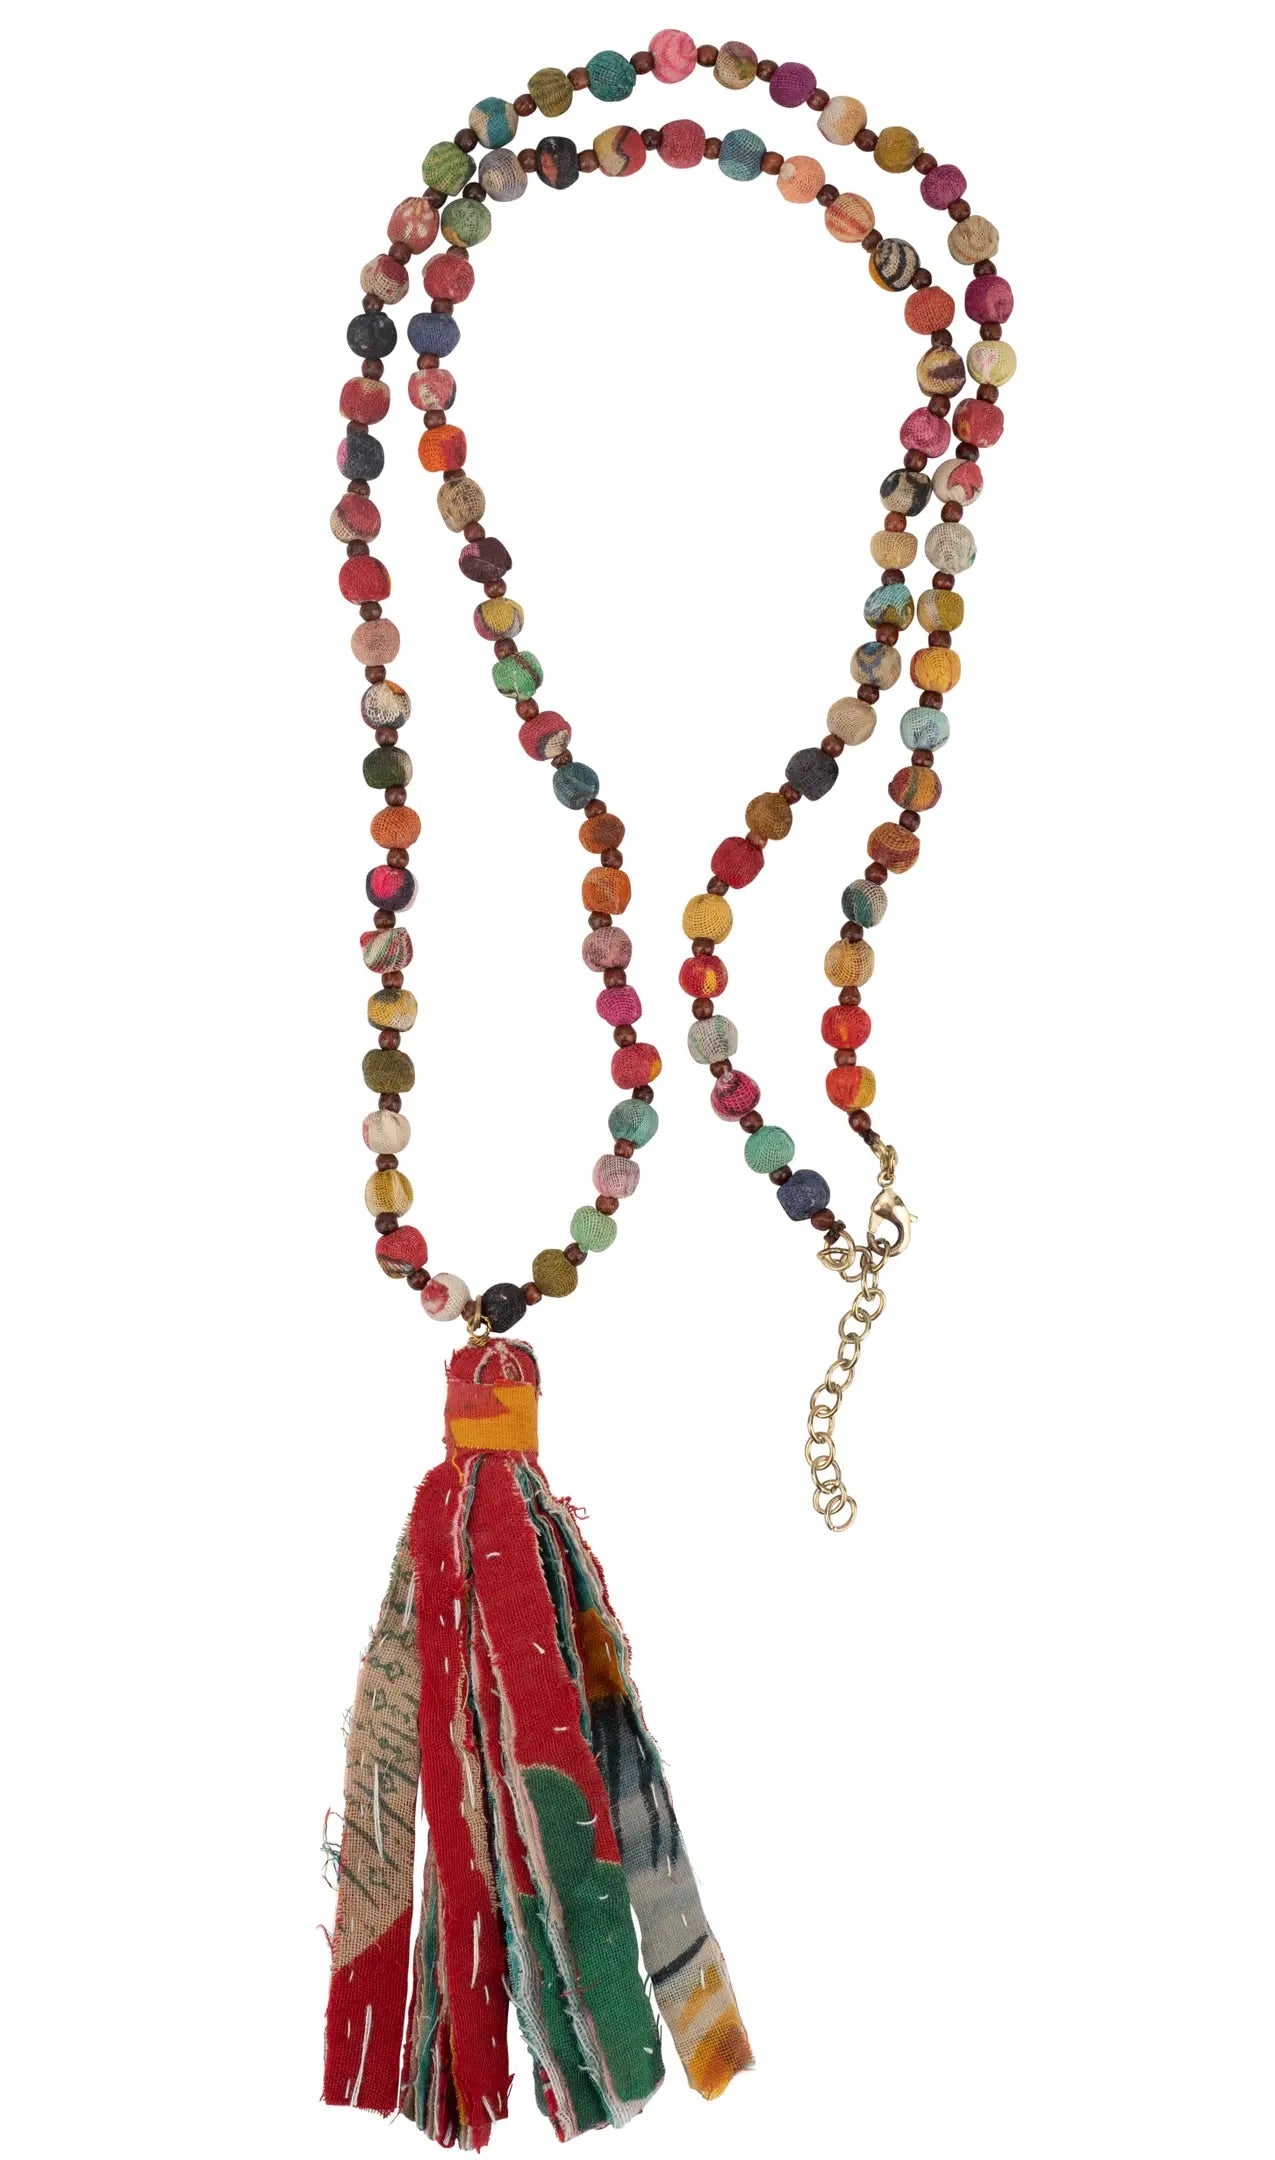 Handcrafted Upcycled Beaded India Tassel Necklace